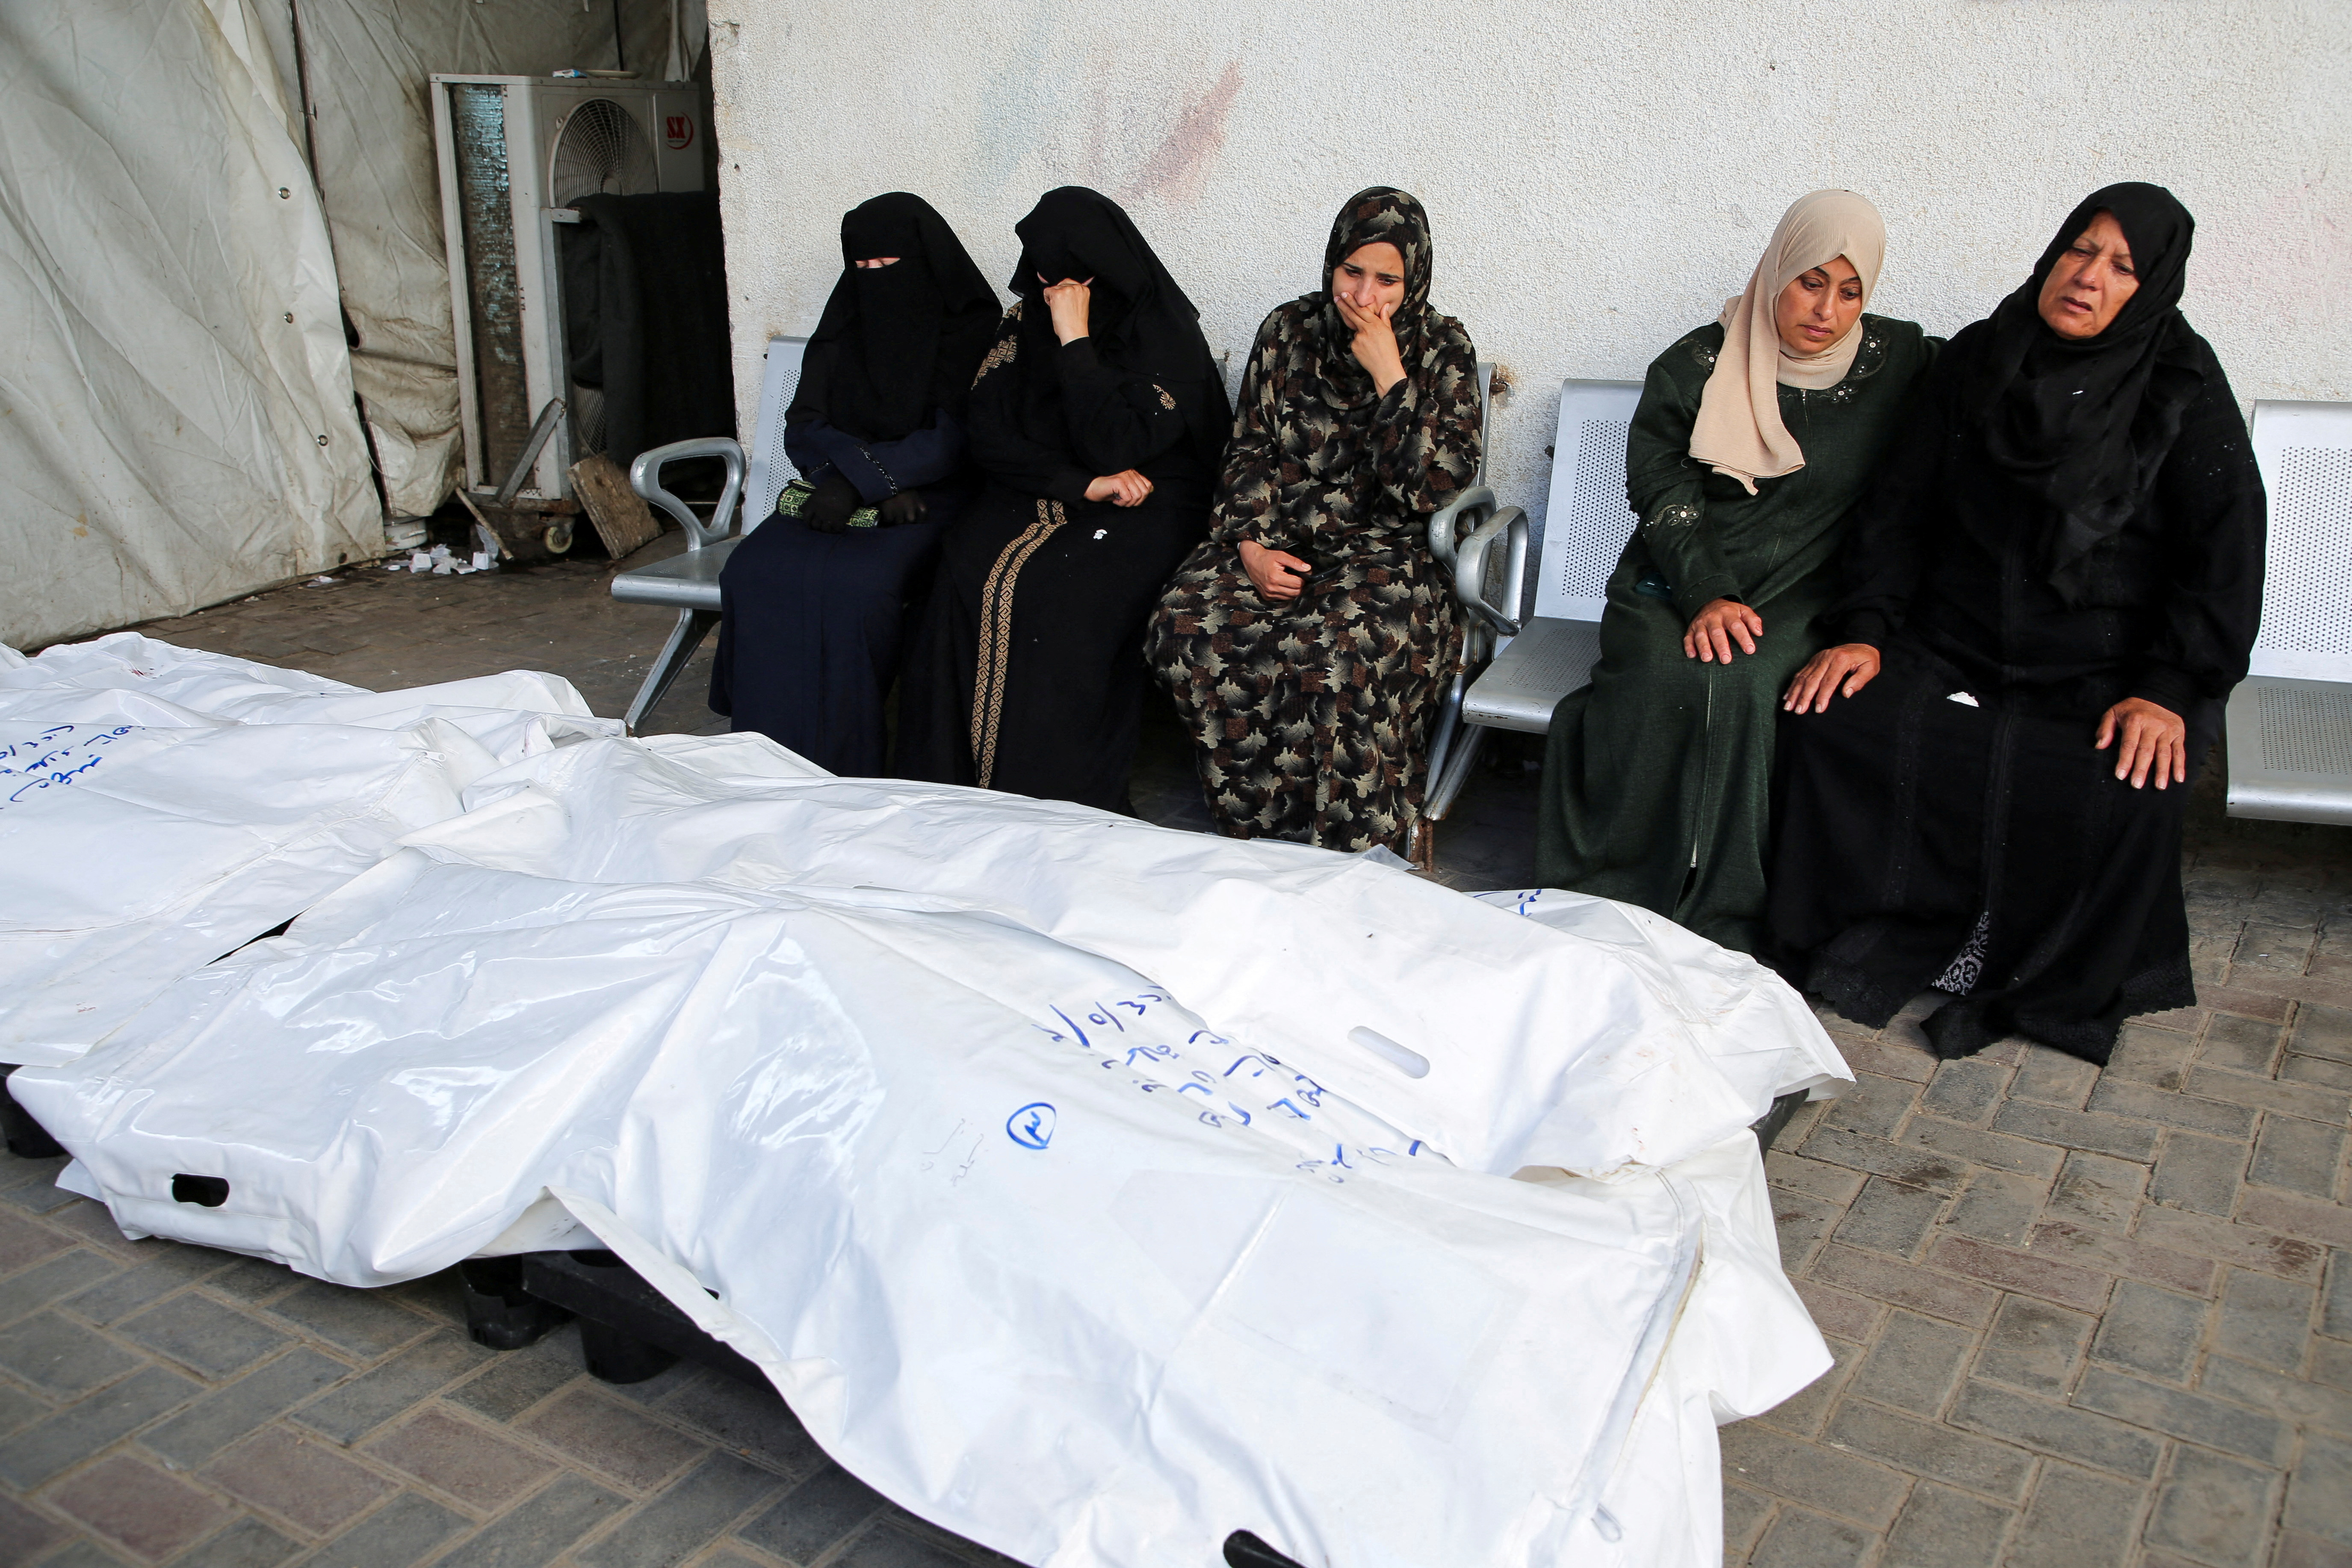 Mourners react next to the bodies of Palestinians killed in an Israeli strike, in Rafah, southern Gaza Strip